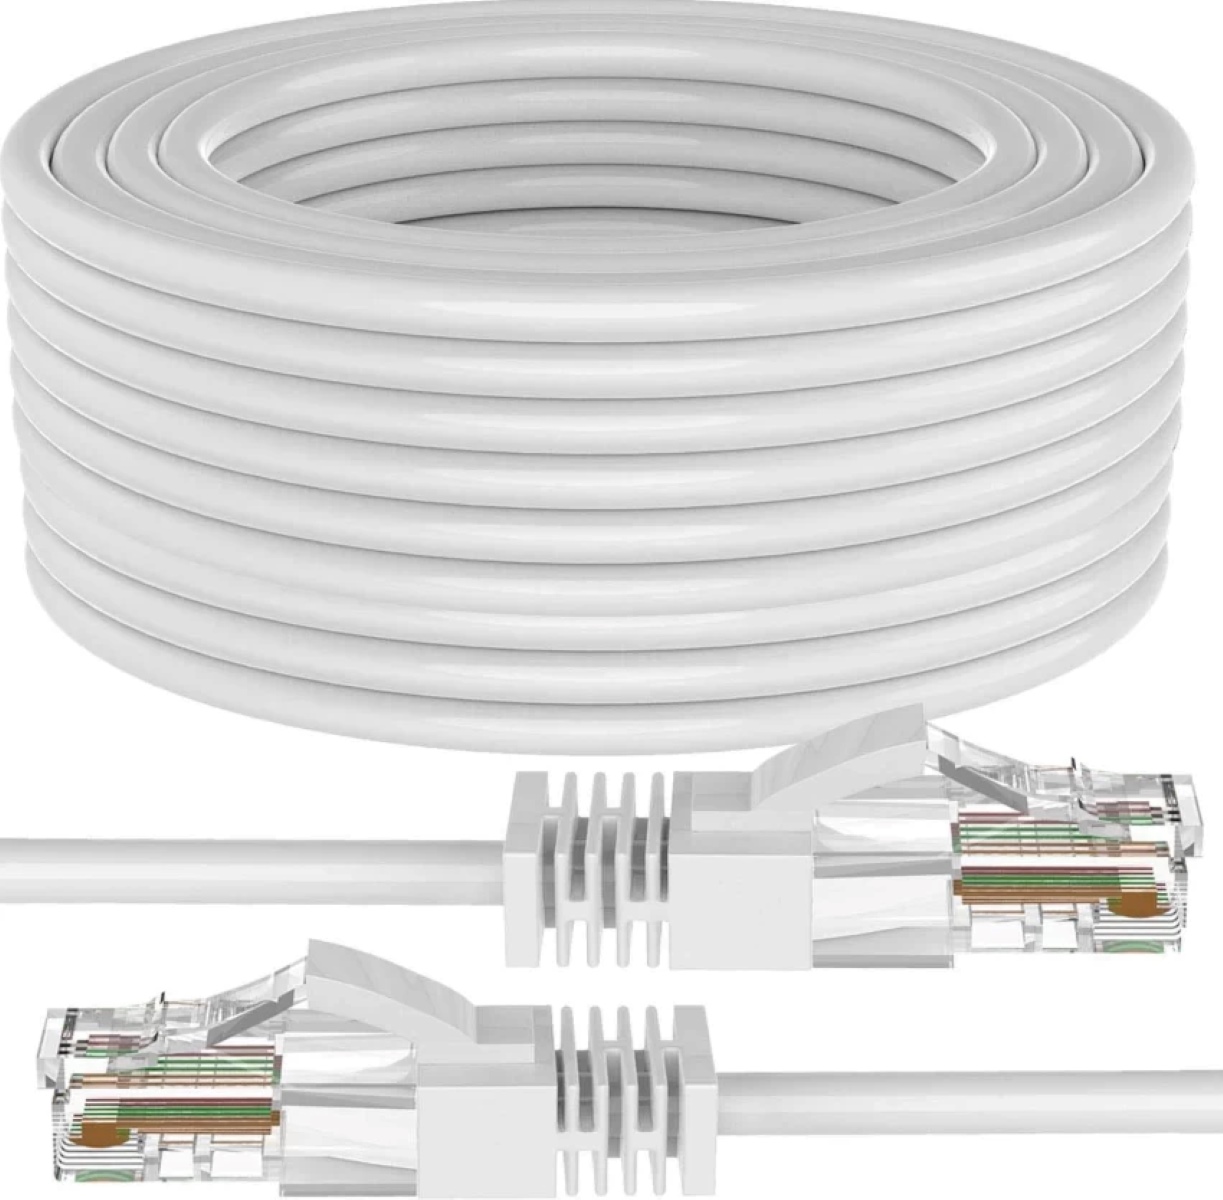 What Type Of Cabling Can Be Used For An Ethernet 100Base-T Network